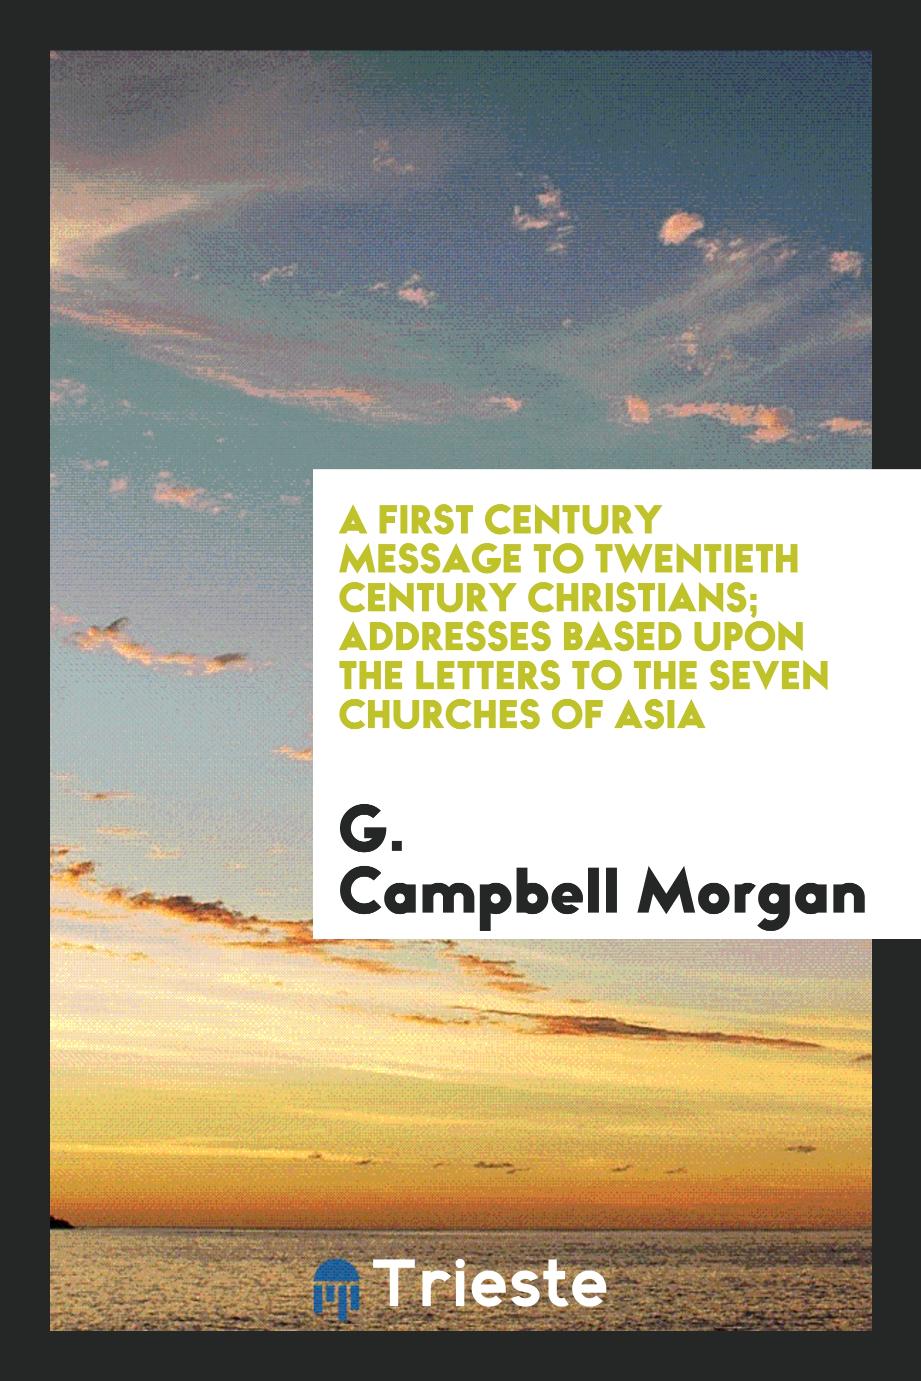 A first century message to twentieth century Christians; addresses based upon the Letters to the seven churches of Asia